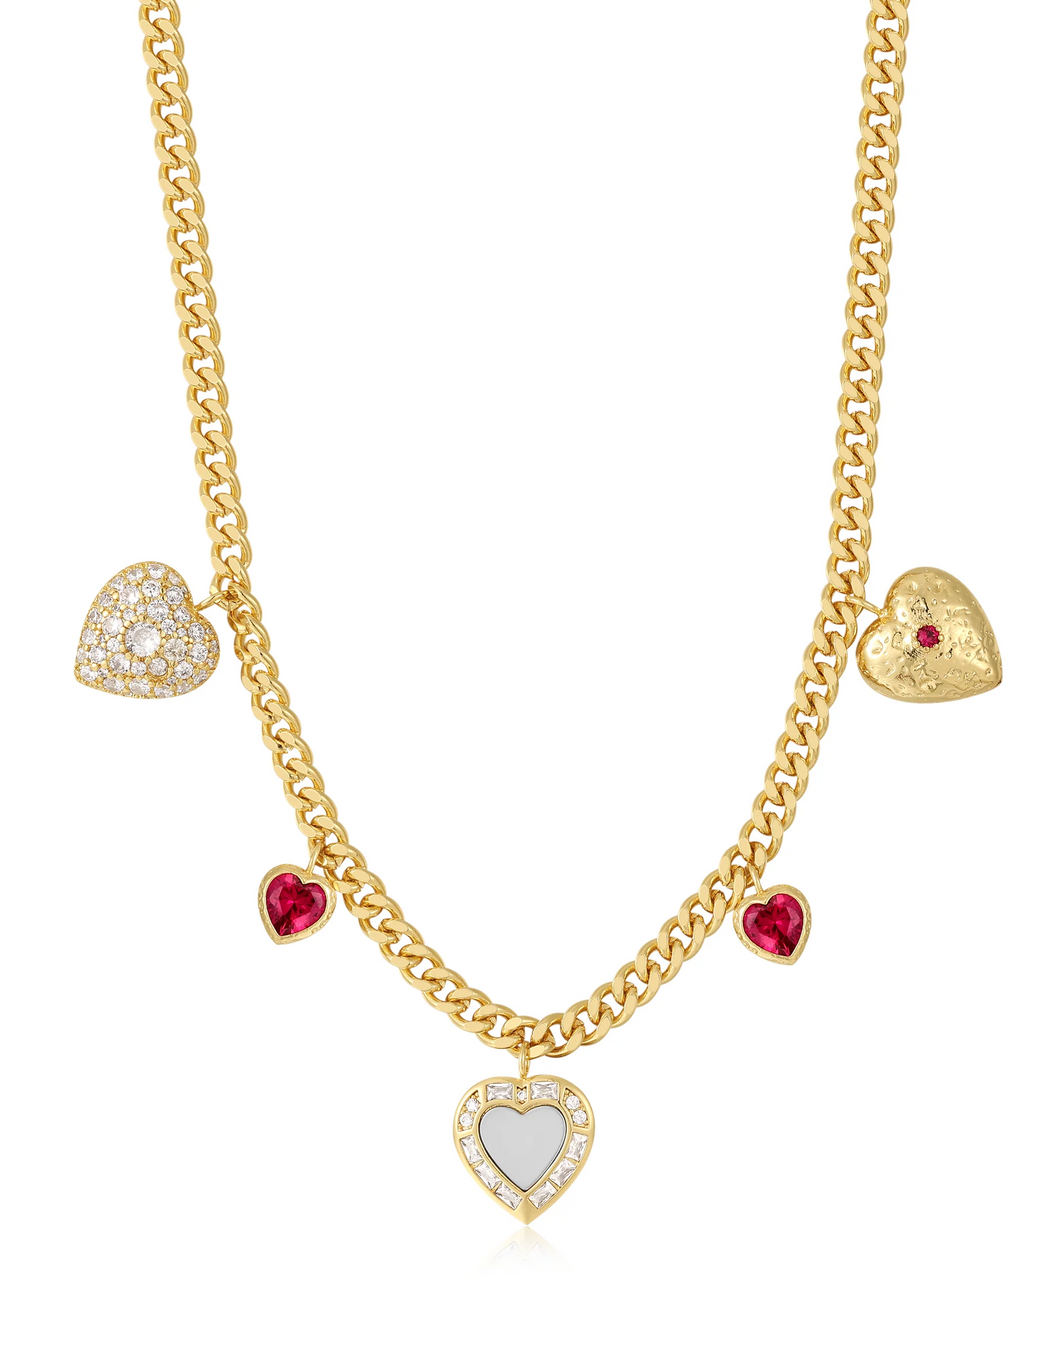 Hanging Hearts Charm Necklace